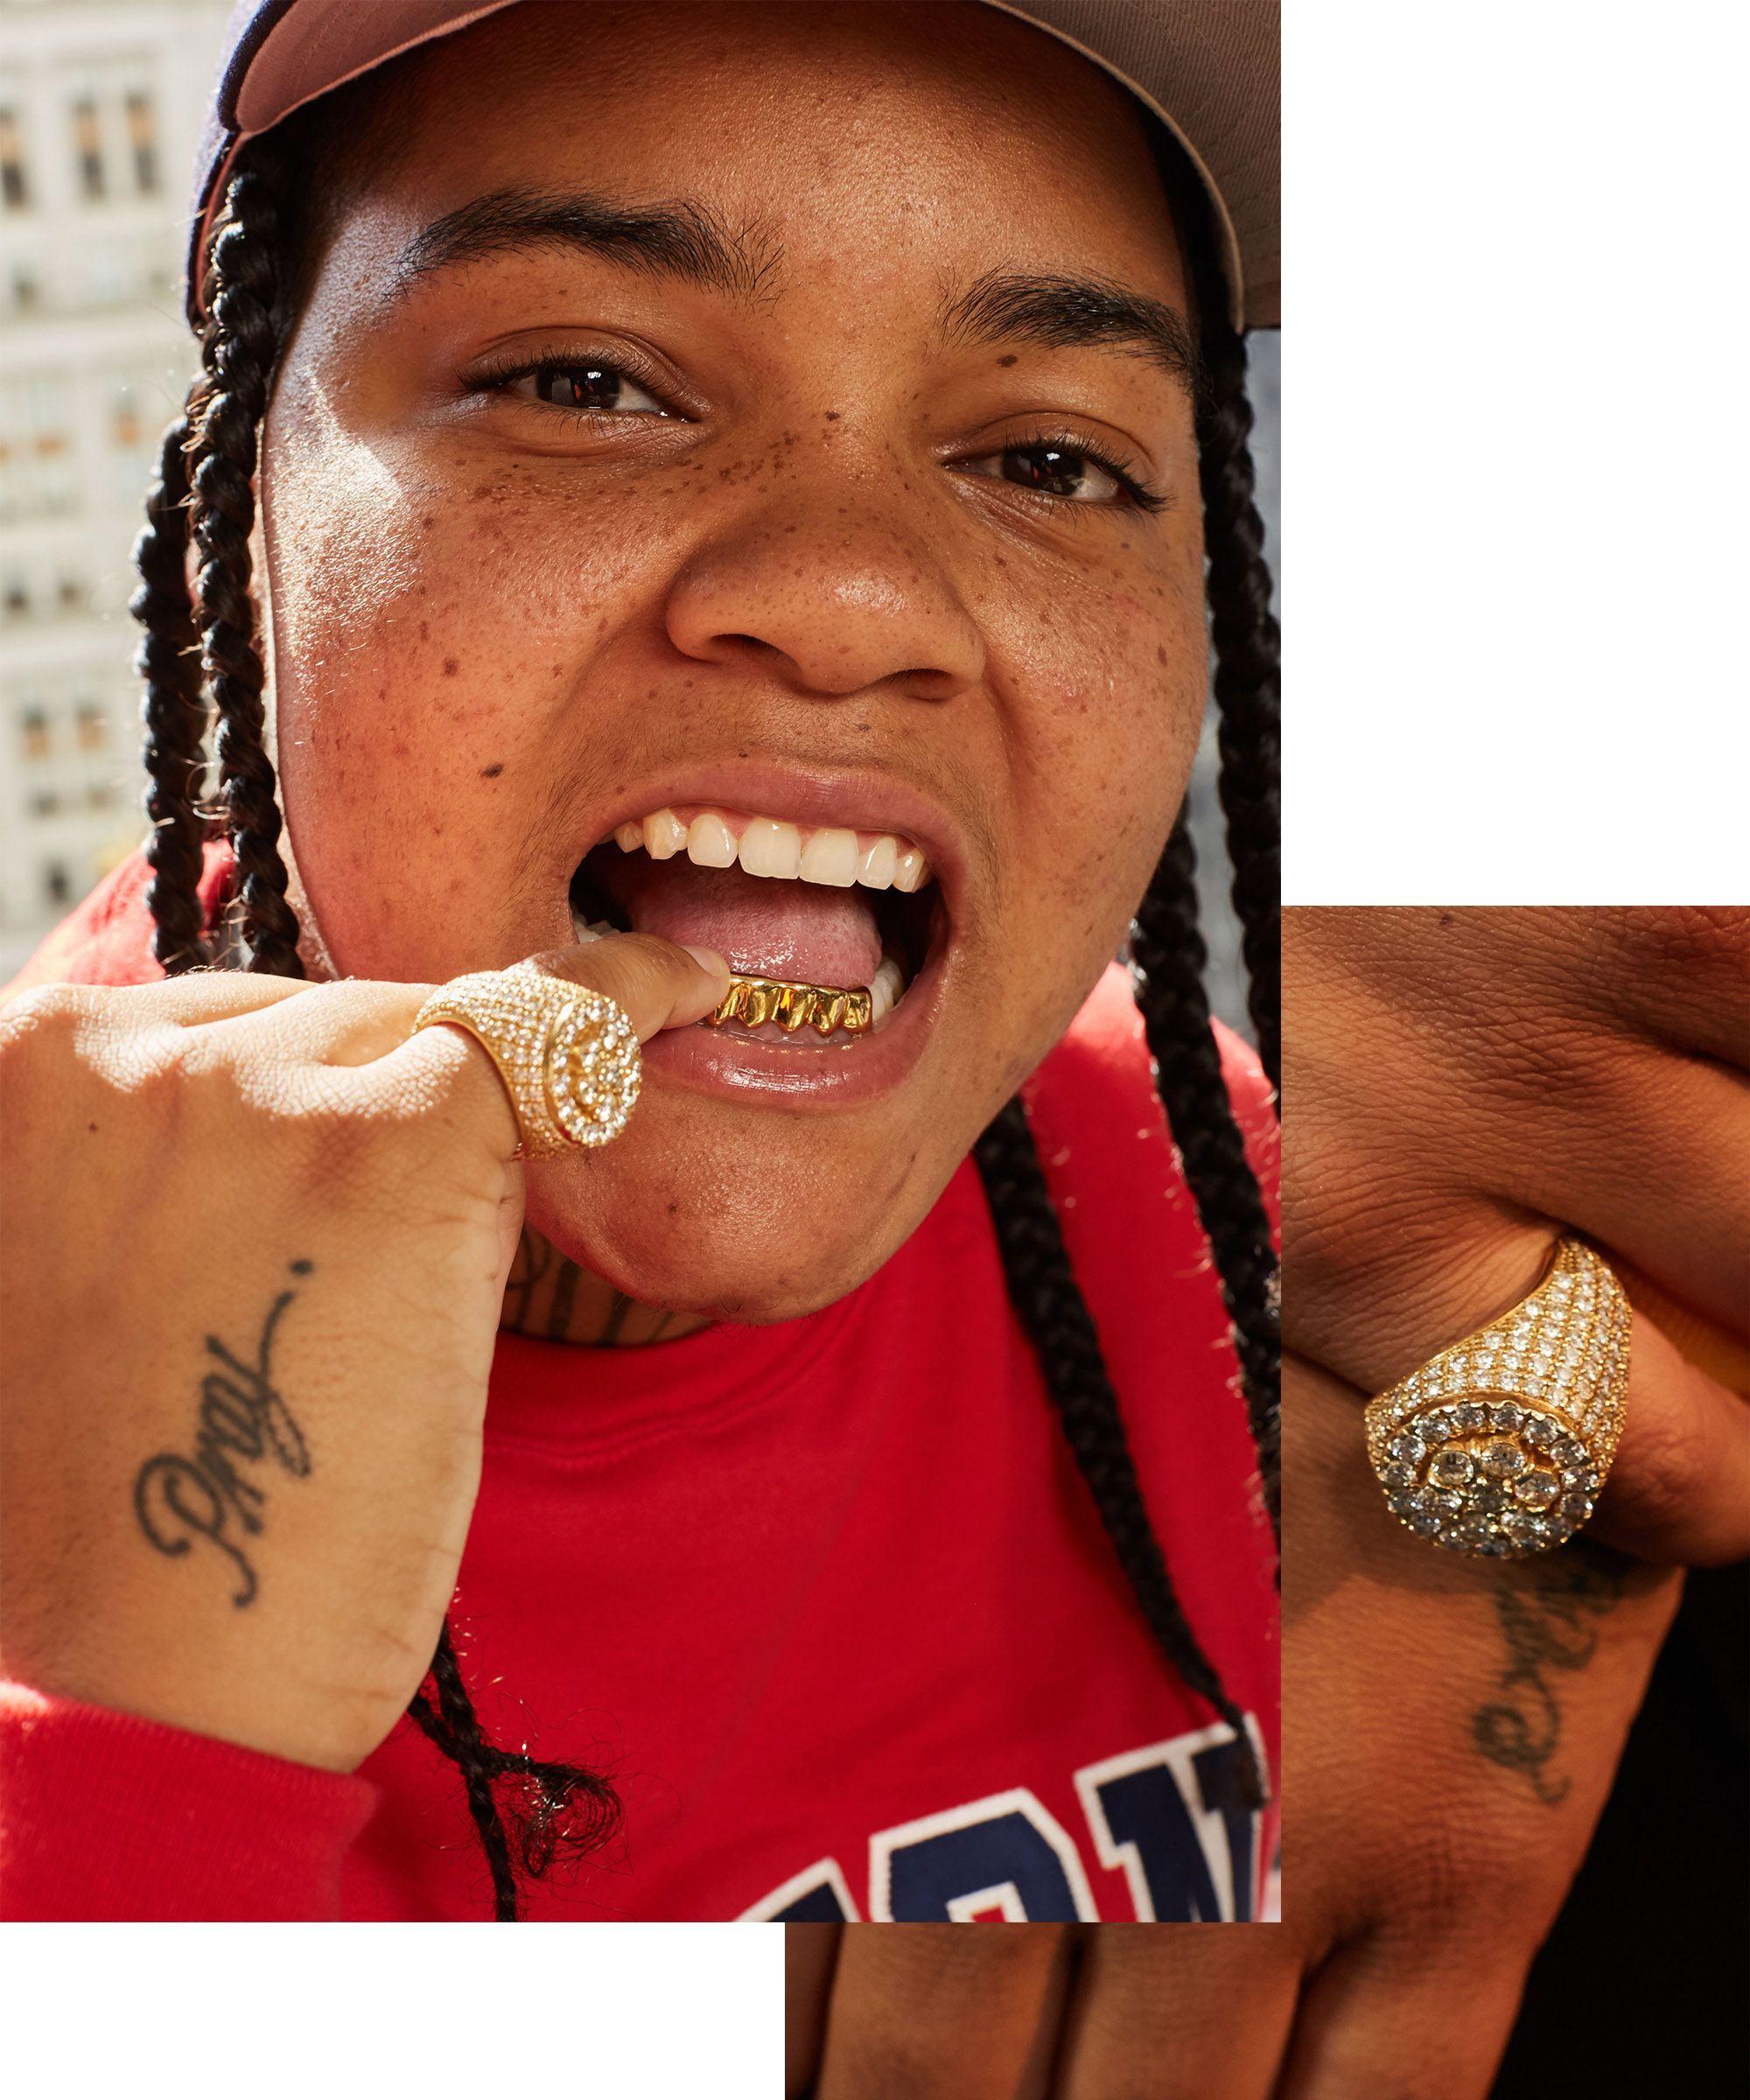 Young MA, Female Rapper Breaking Gender Stereotypes